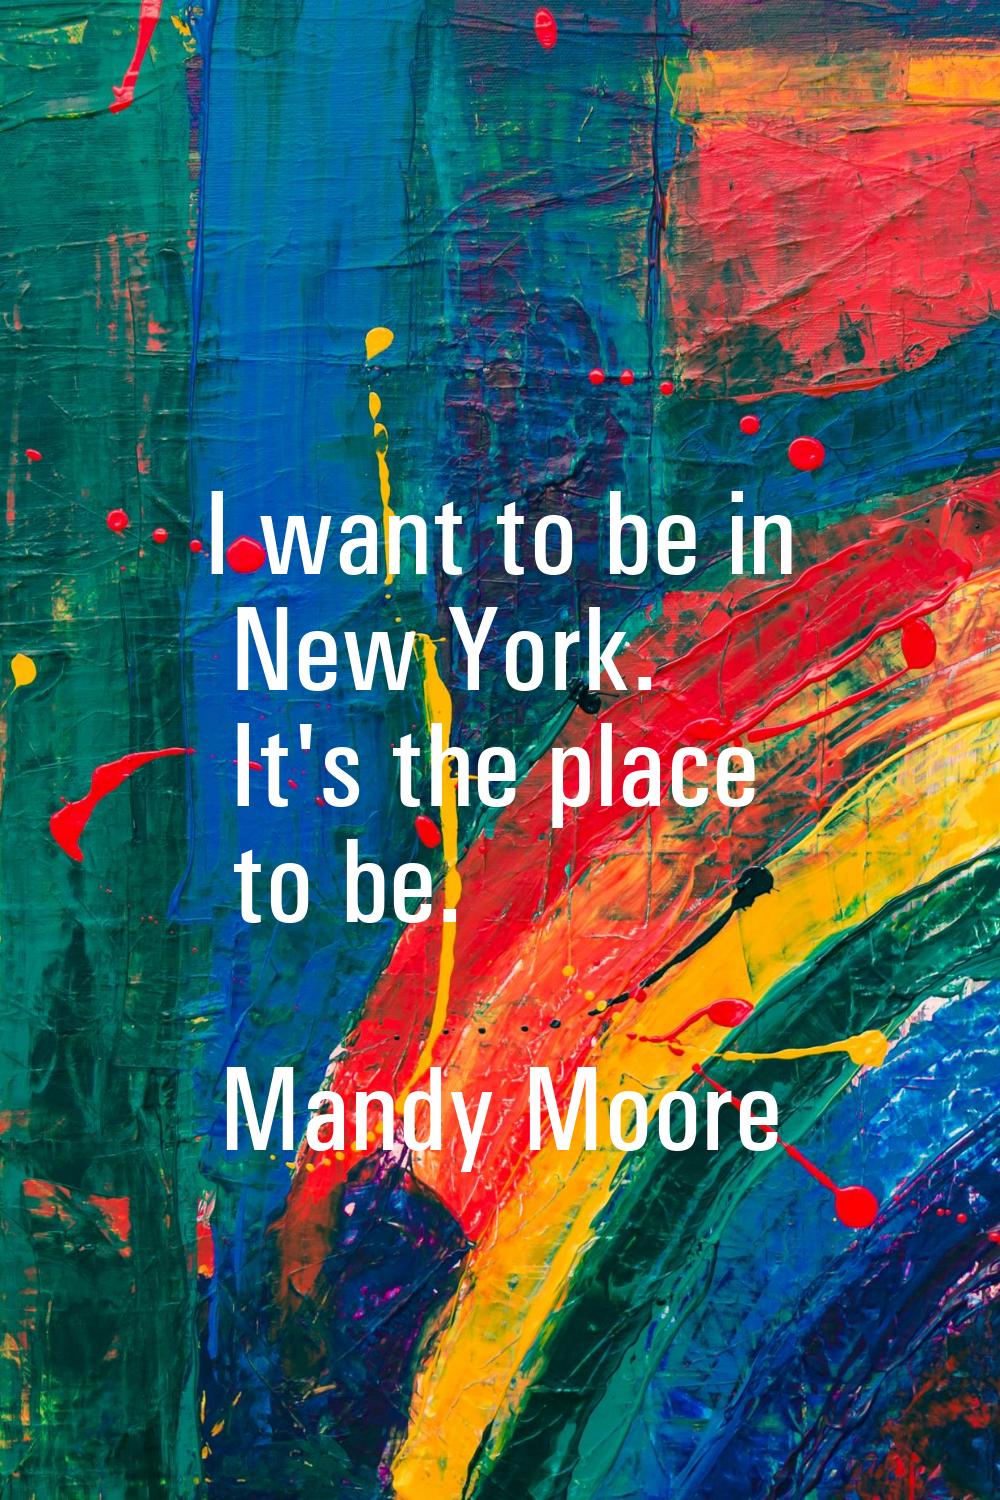 I want to be in New York. It's the place to be.